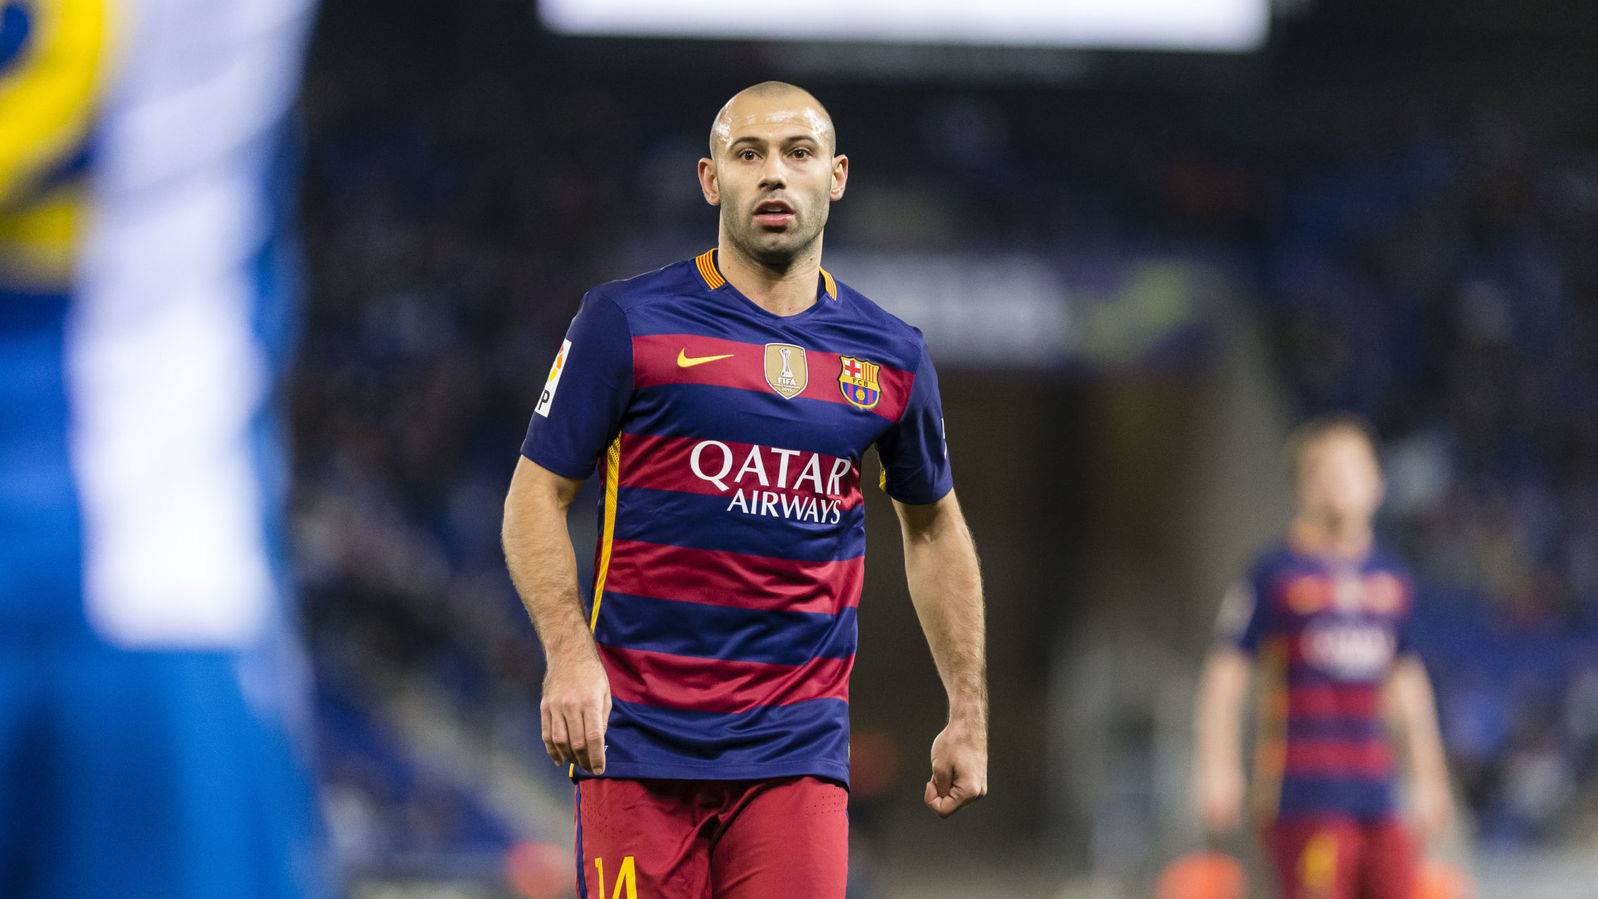 Mascherano, in a party of this season 2015-16